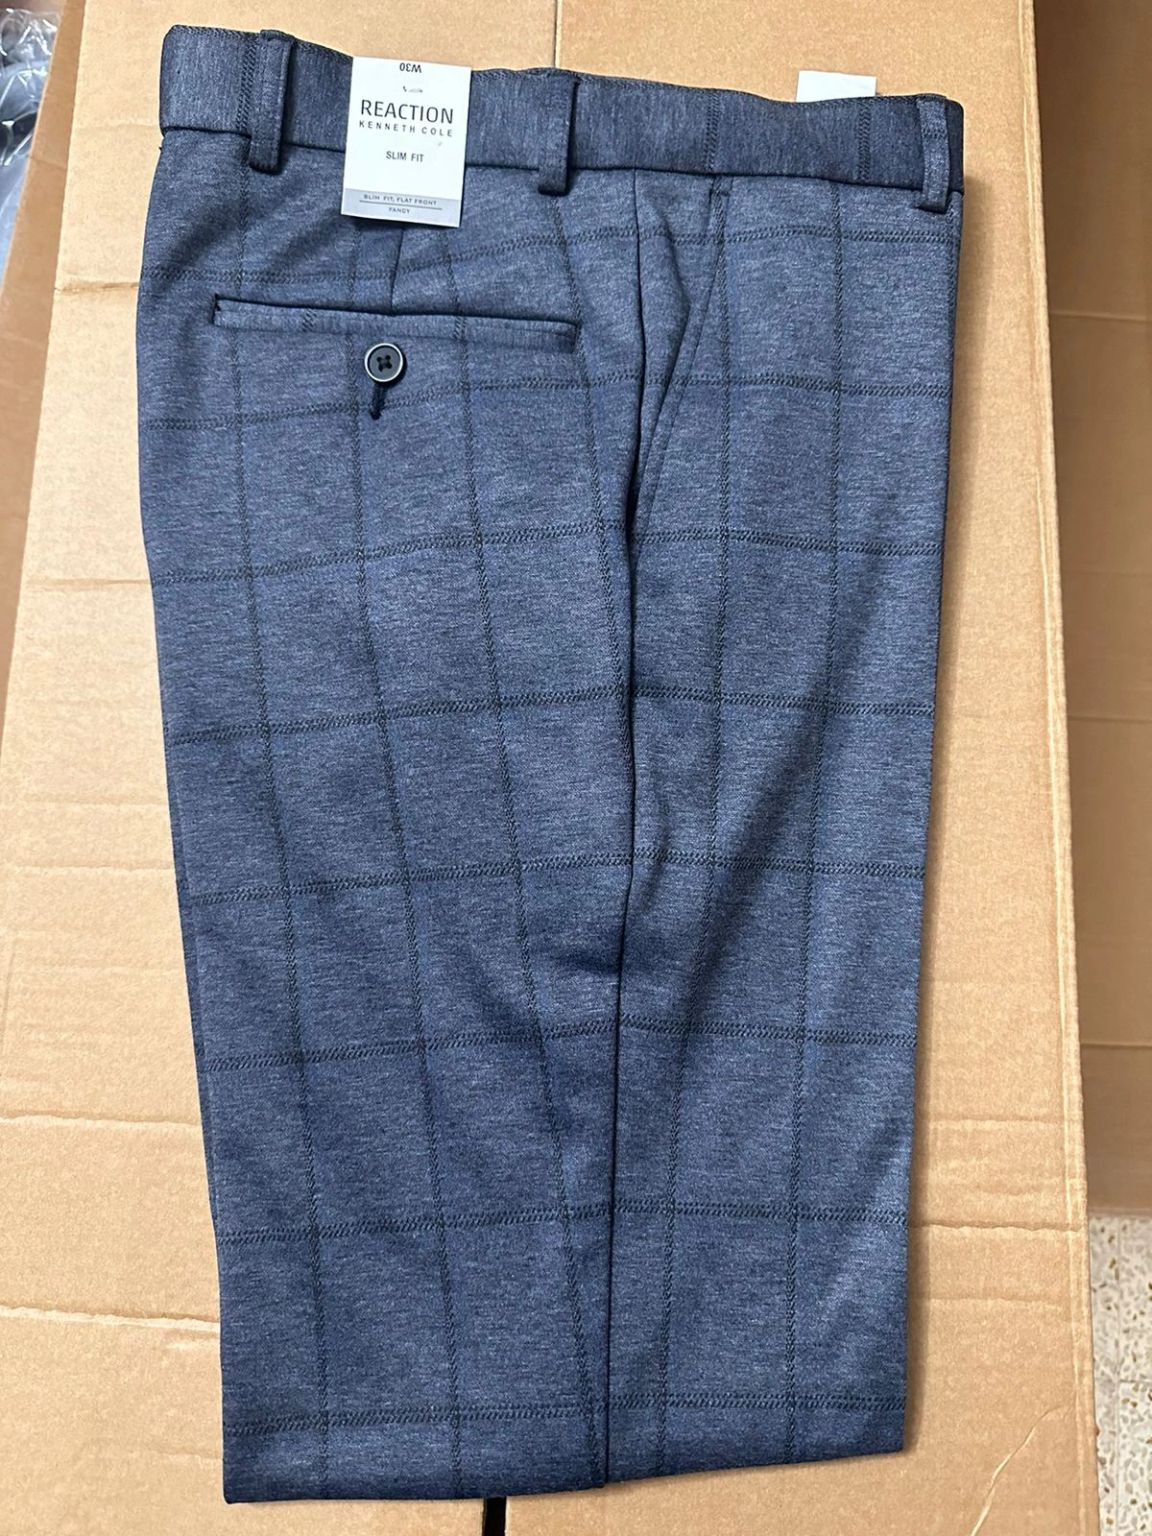 Reajul Islam on LinkedIn: Reaction, KENNETH COLE MARCO PHIL FORMAL PANT ...